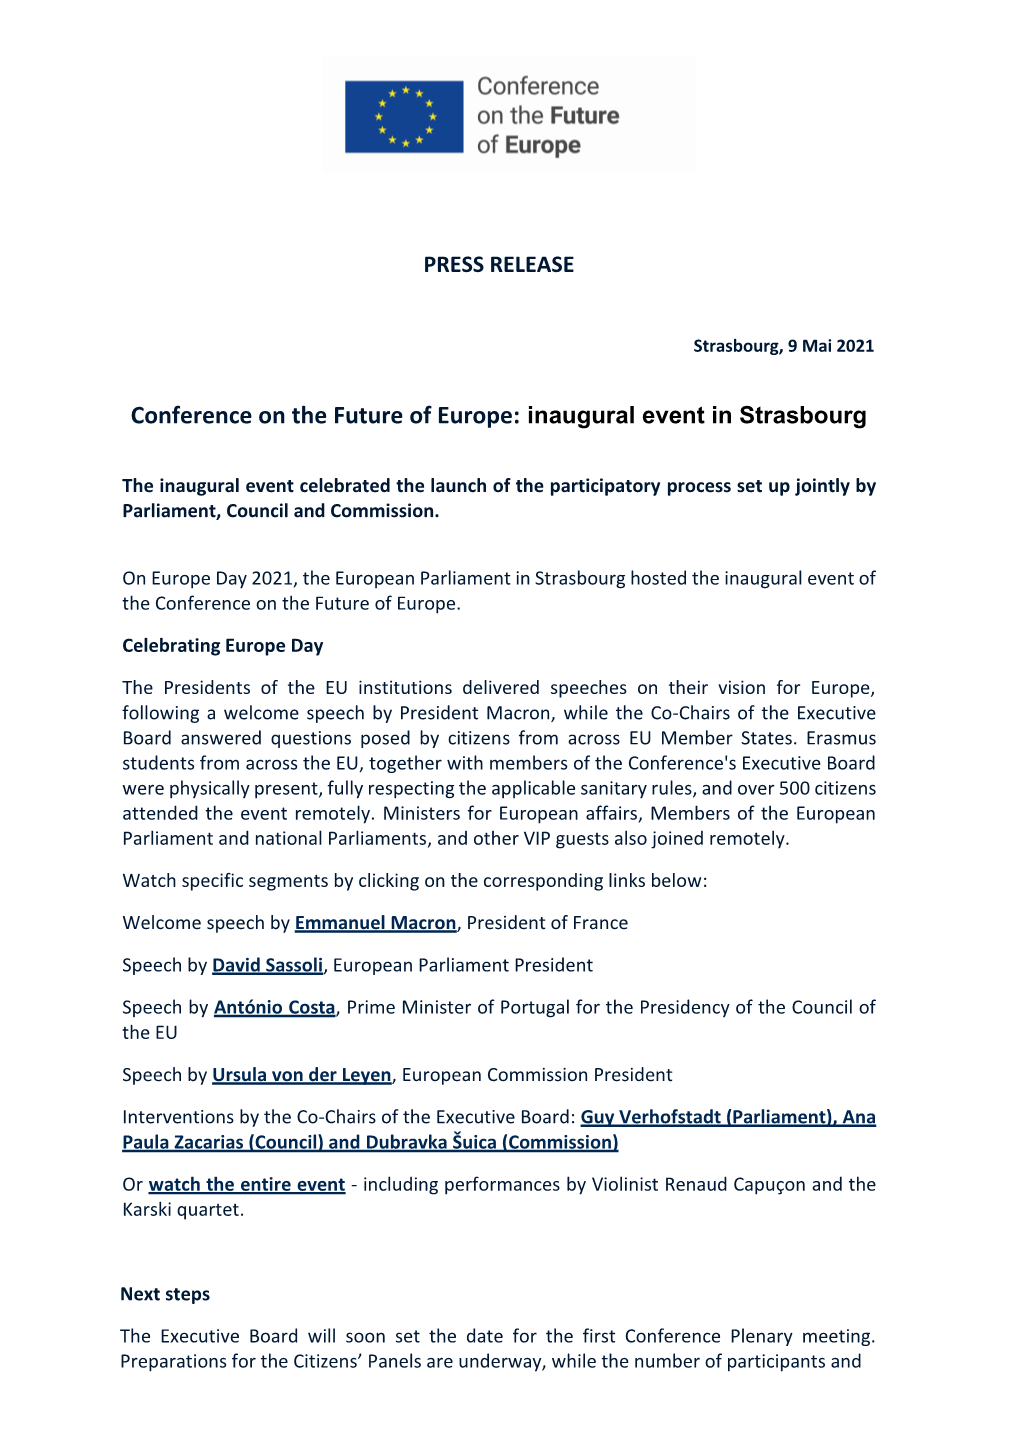 Conference on the Future of Europe: Inaugural Event in Strasbourg